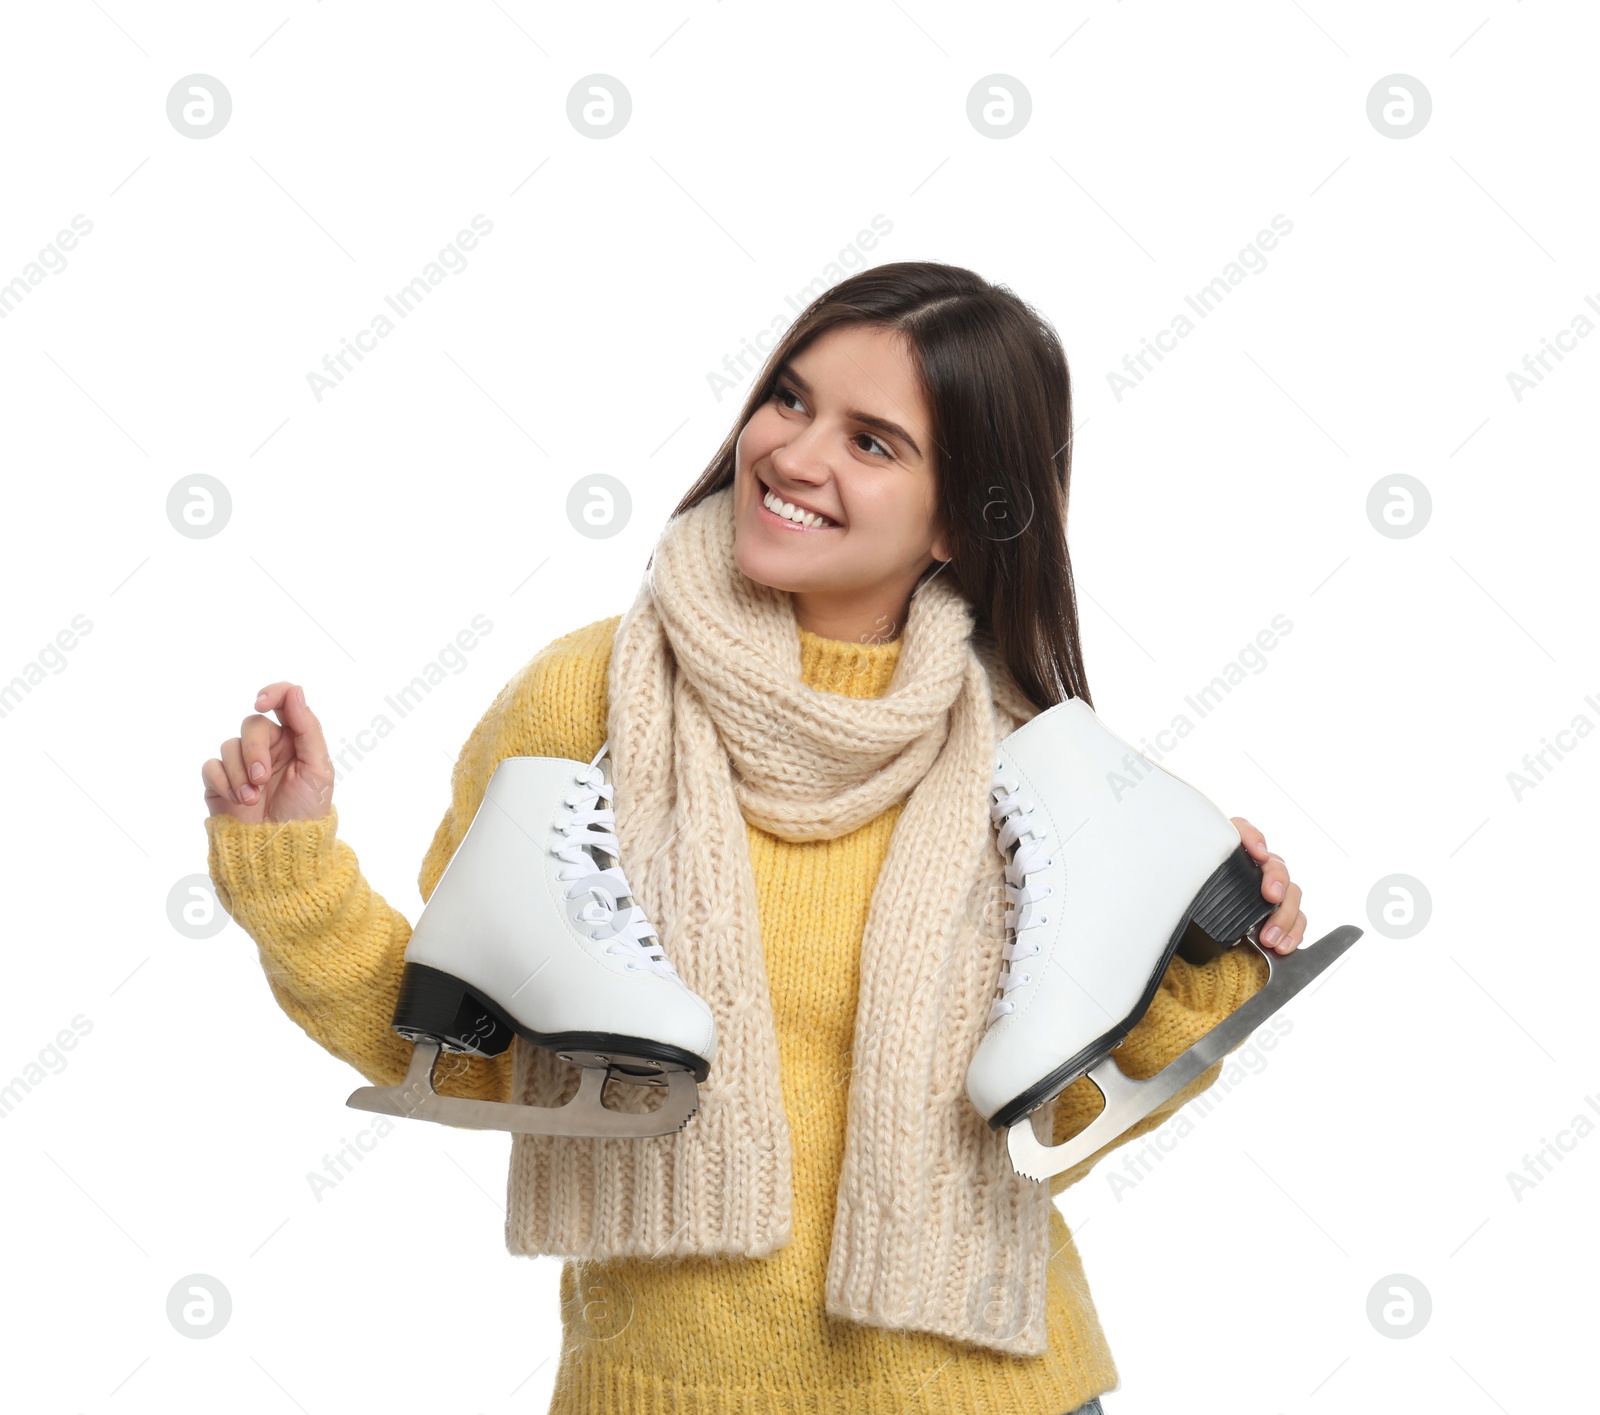 Photo of Happy woman with ice skates on white background